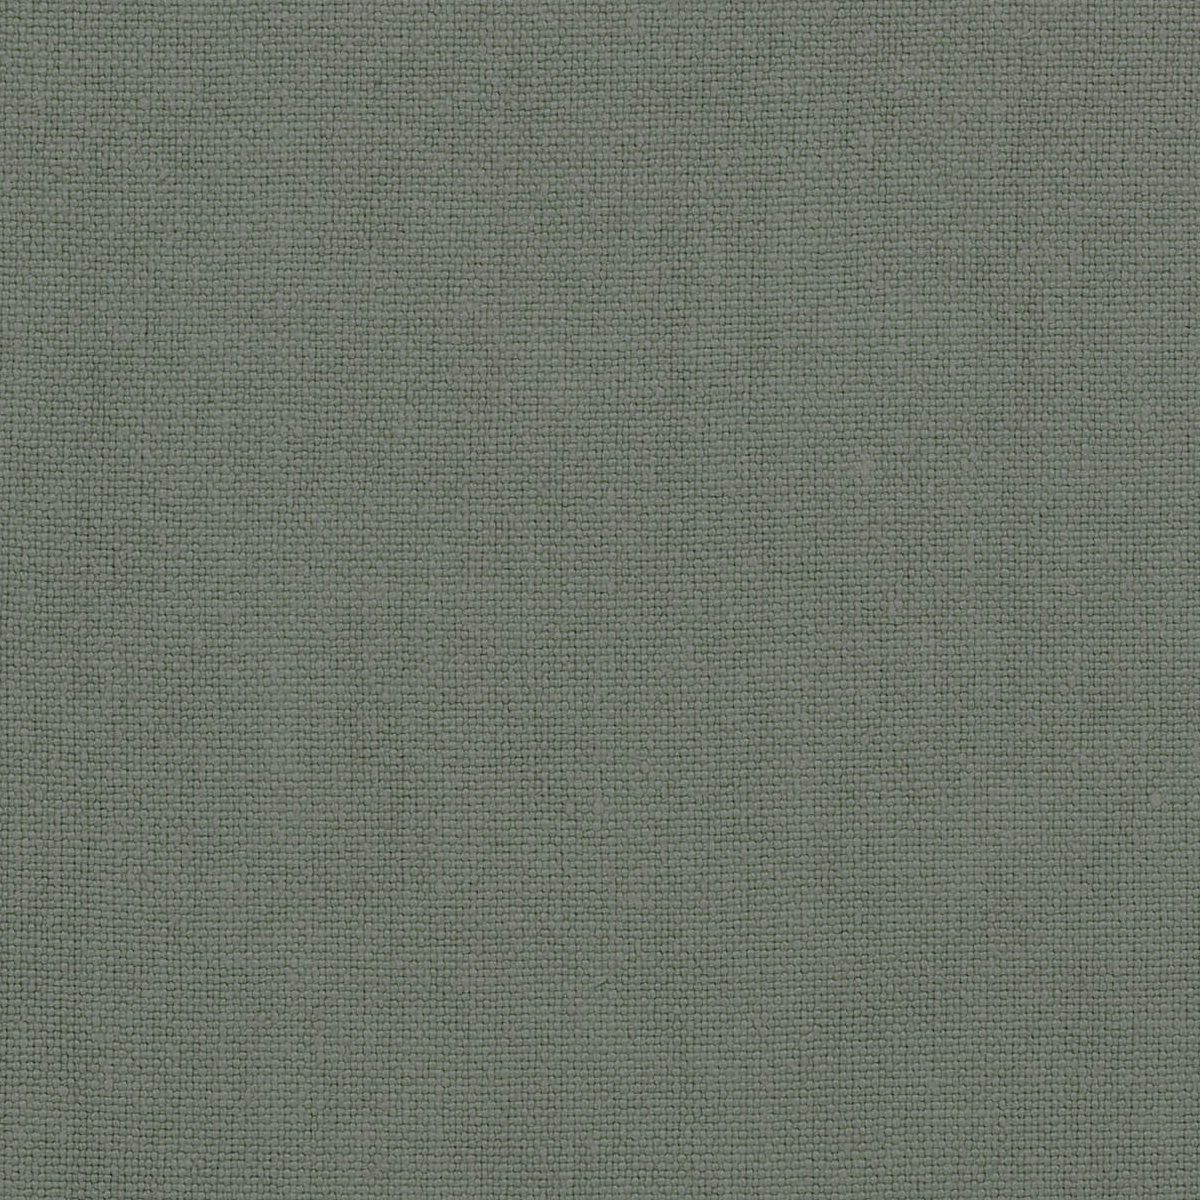 Sample of hemp fabric in a green-blue colourway